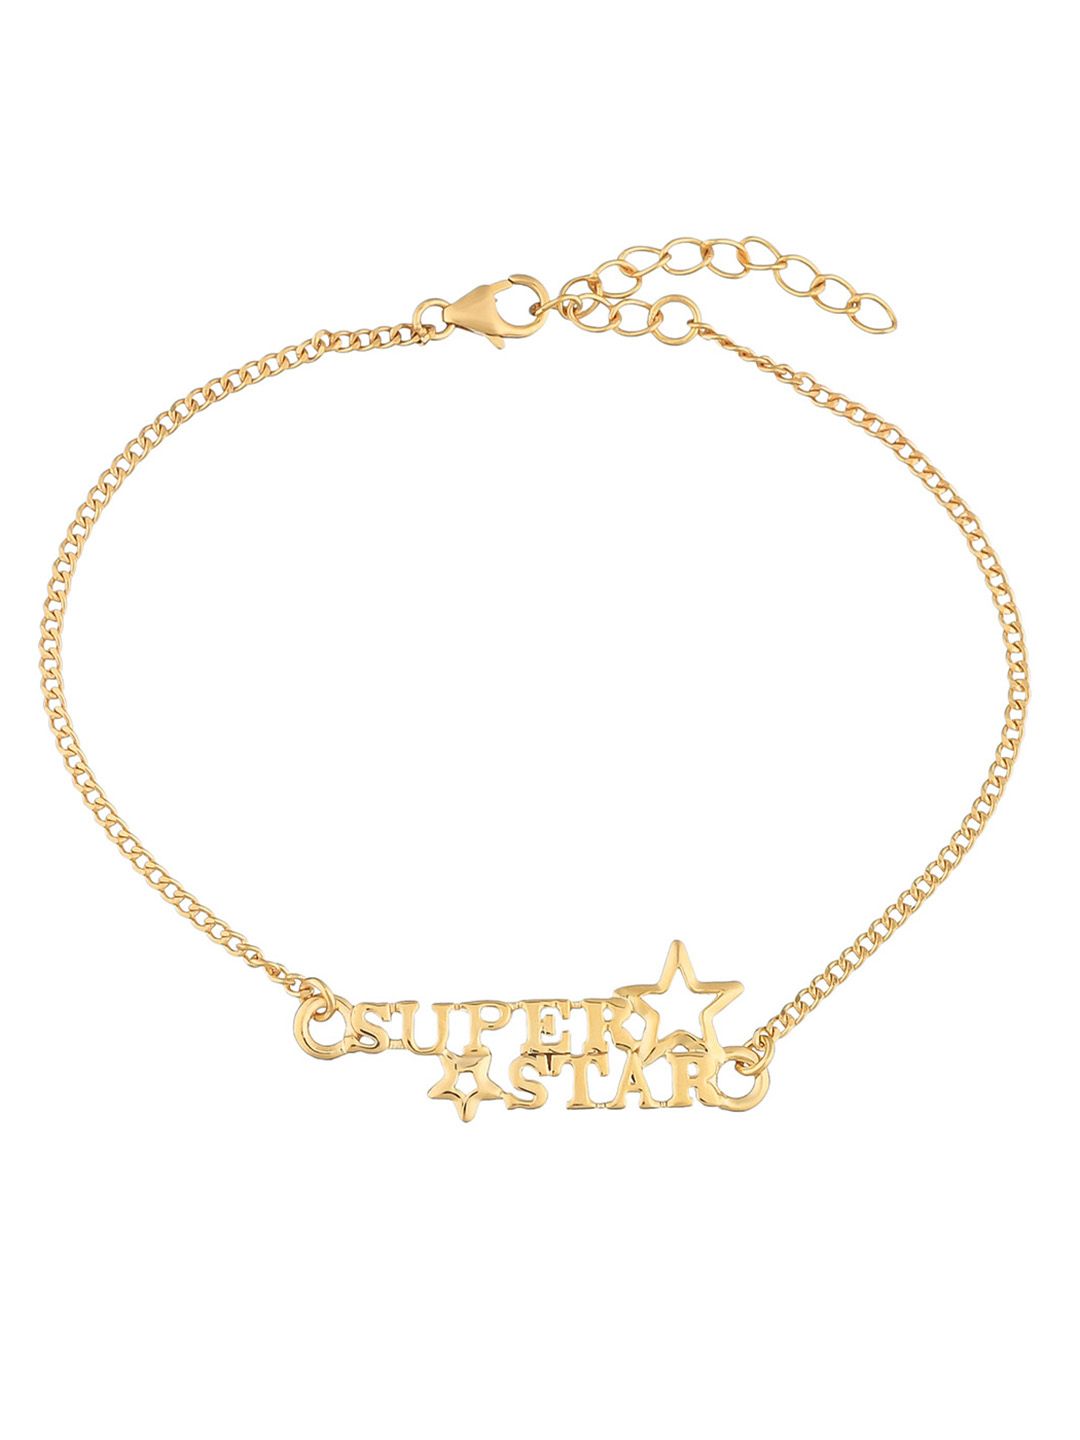 Voylla Women Gold-Toned Silver Gold-Plated Charm Bracelet Price in India